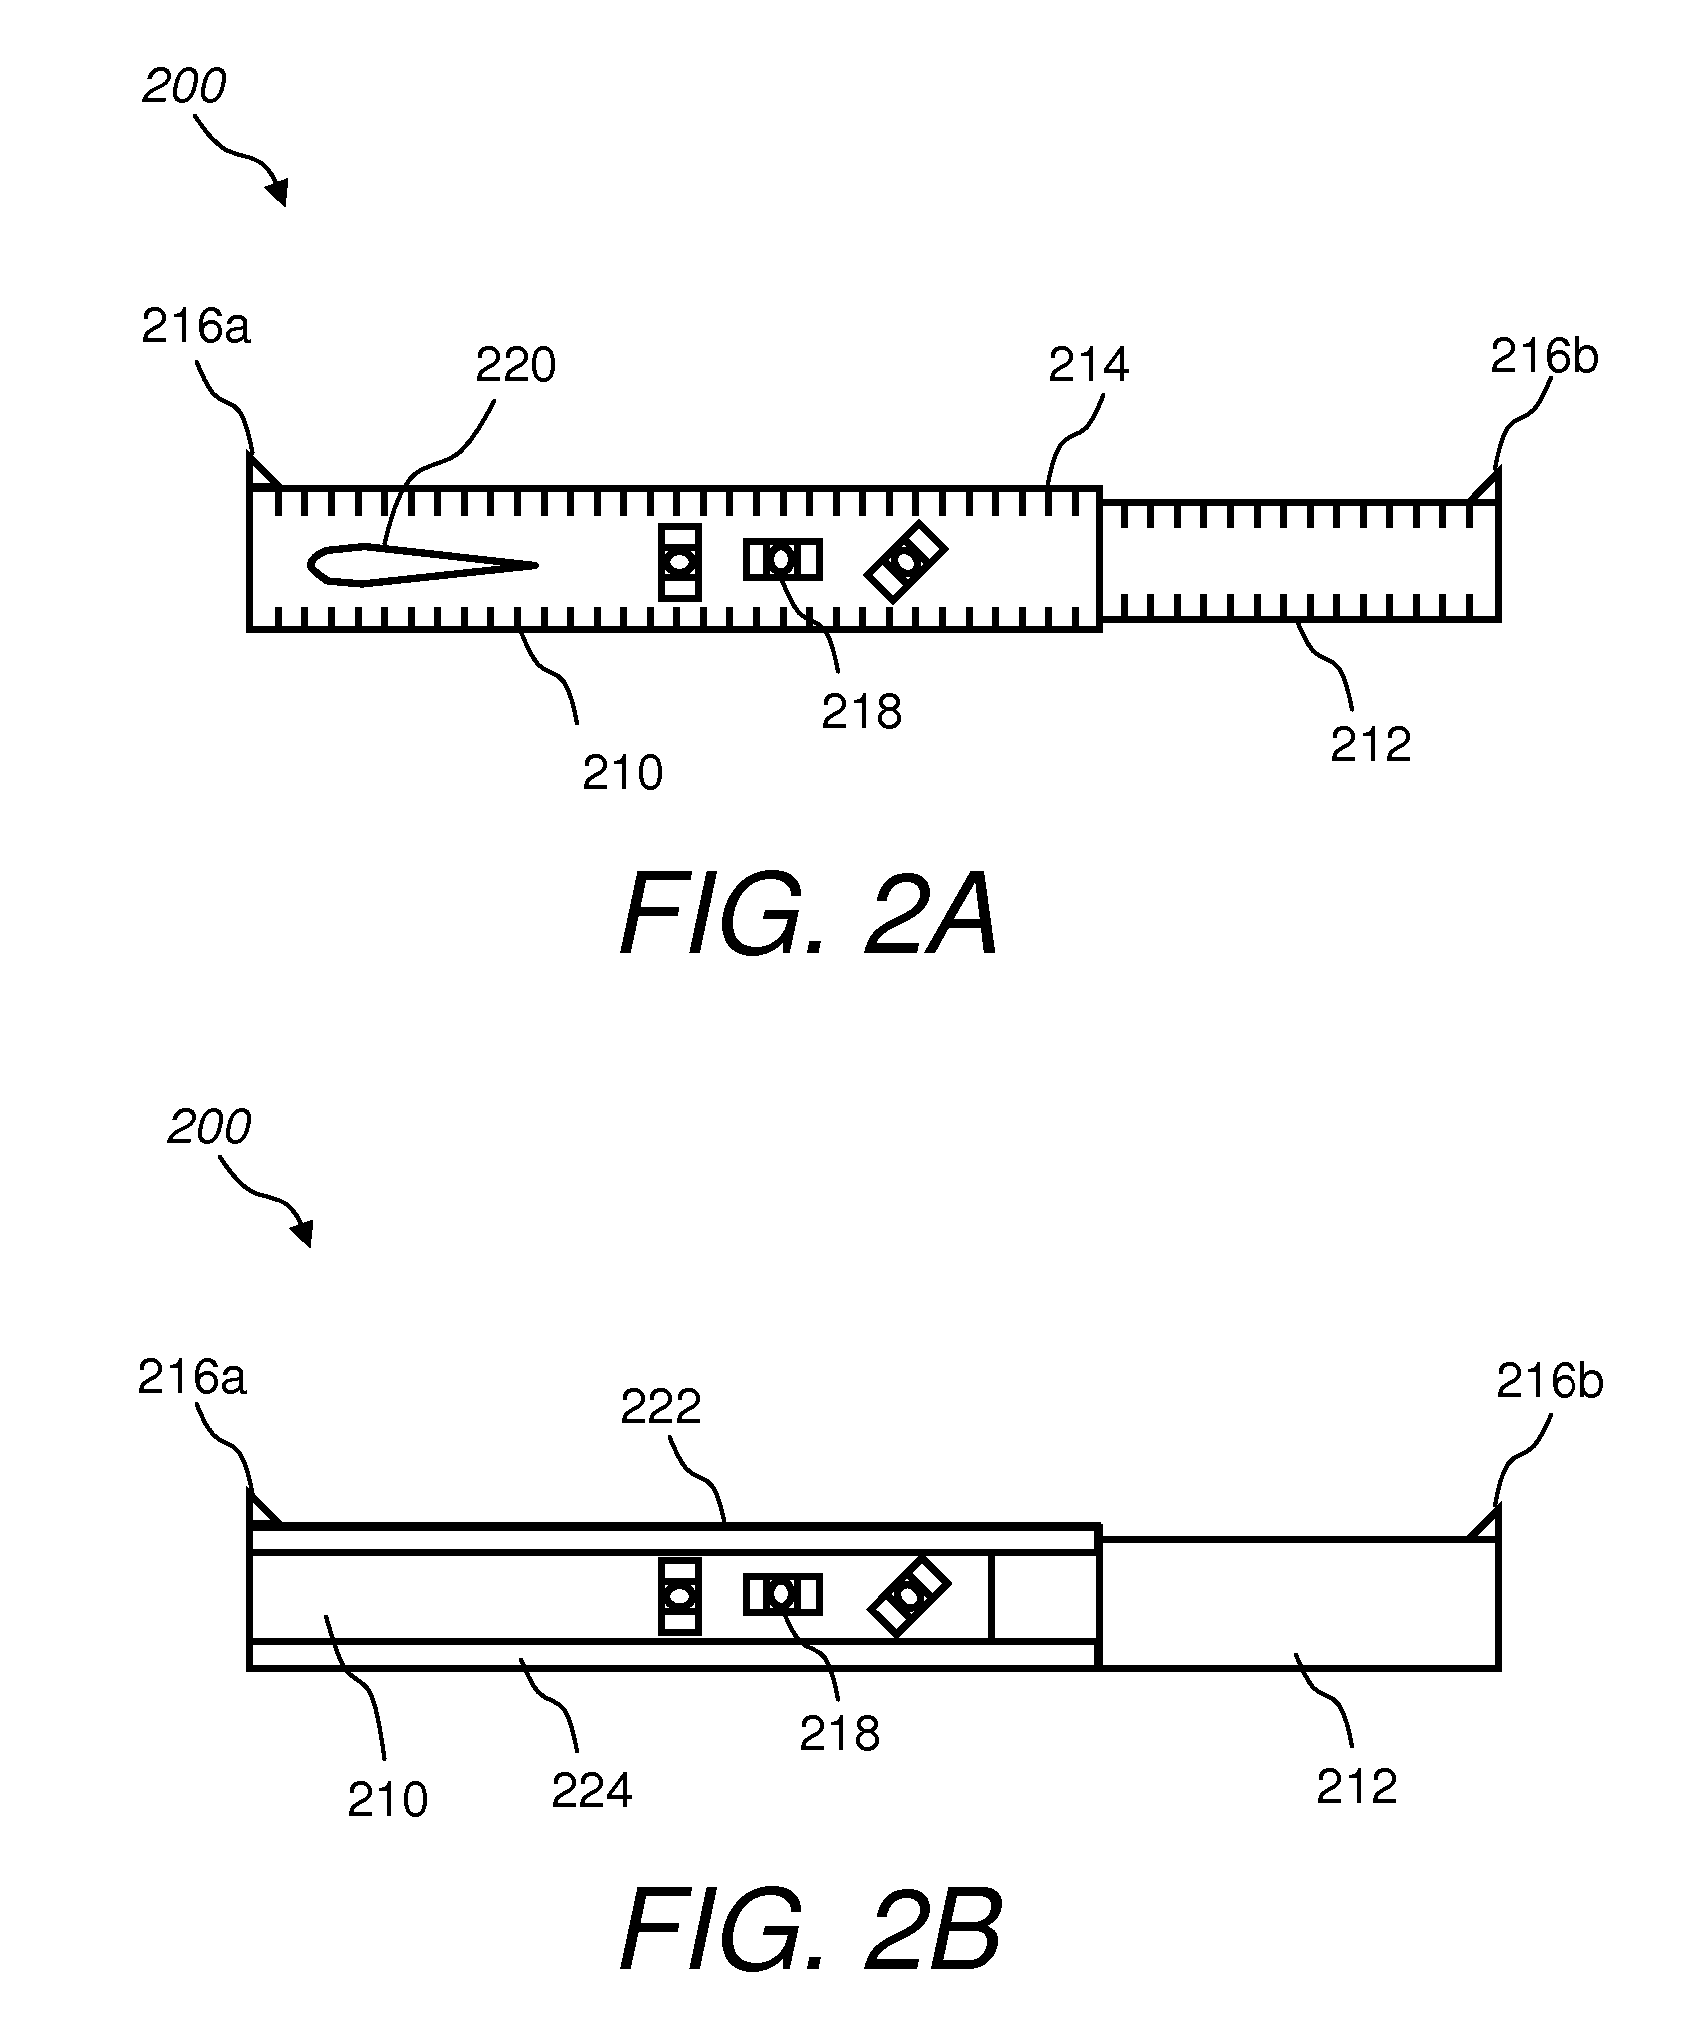 Extendable utility device and associated method